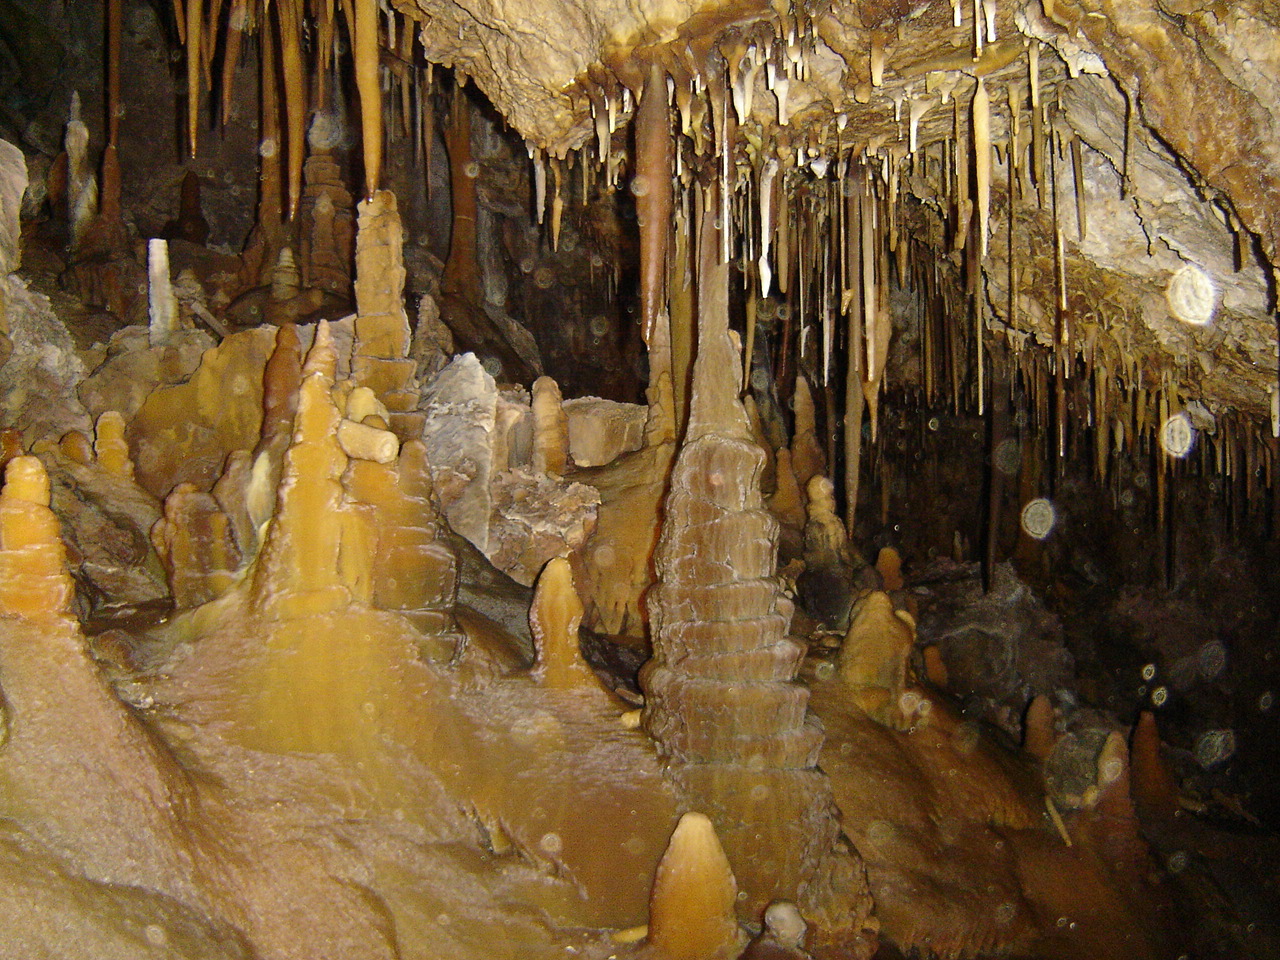 More formations in Lincoln caverns.